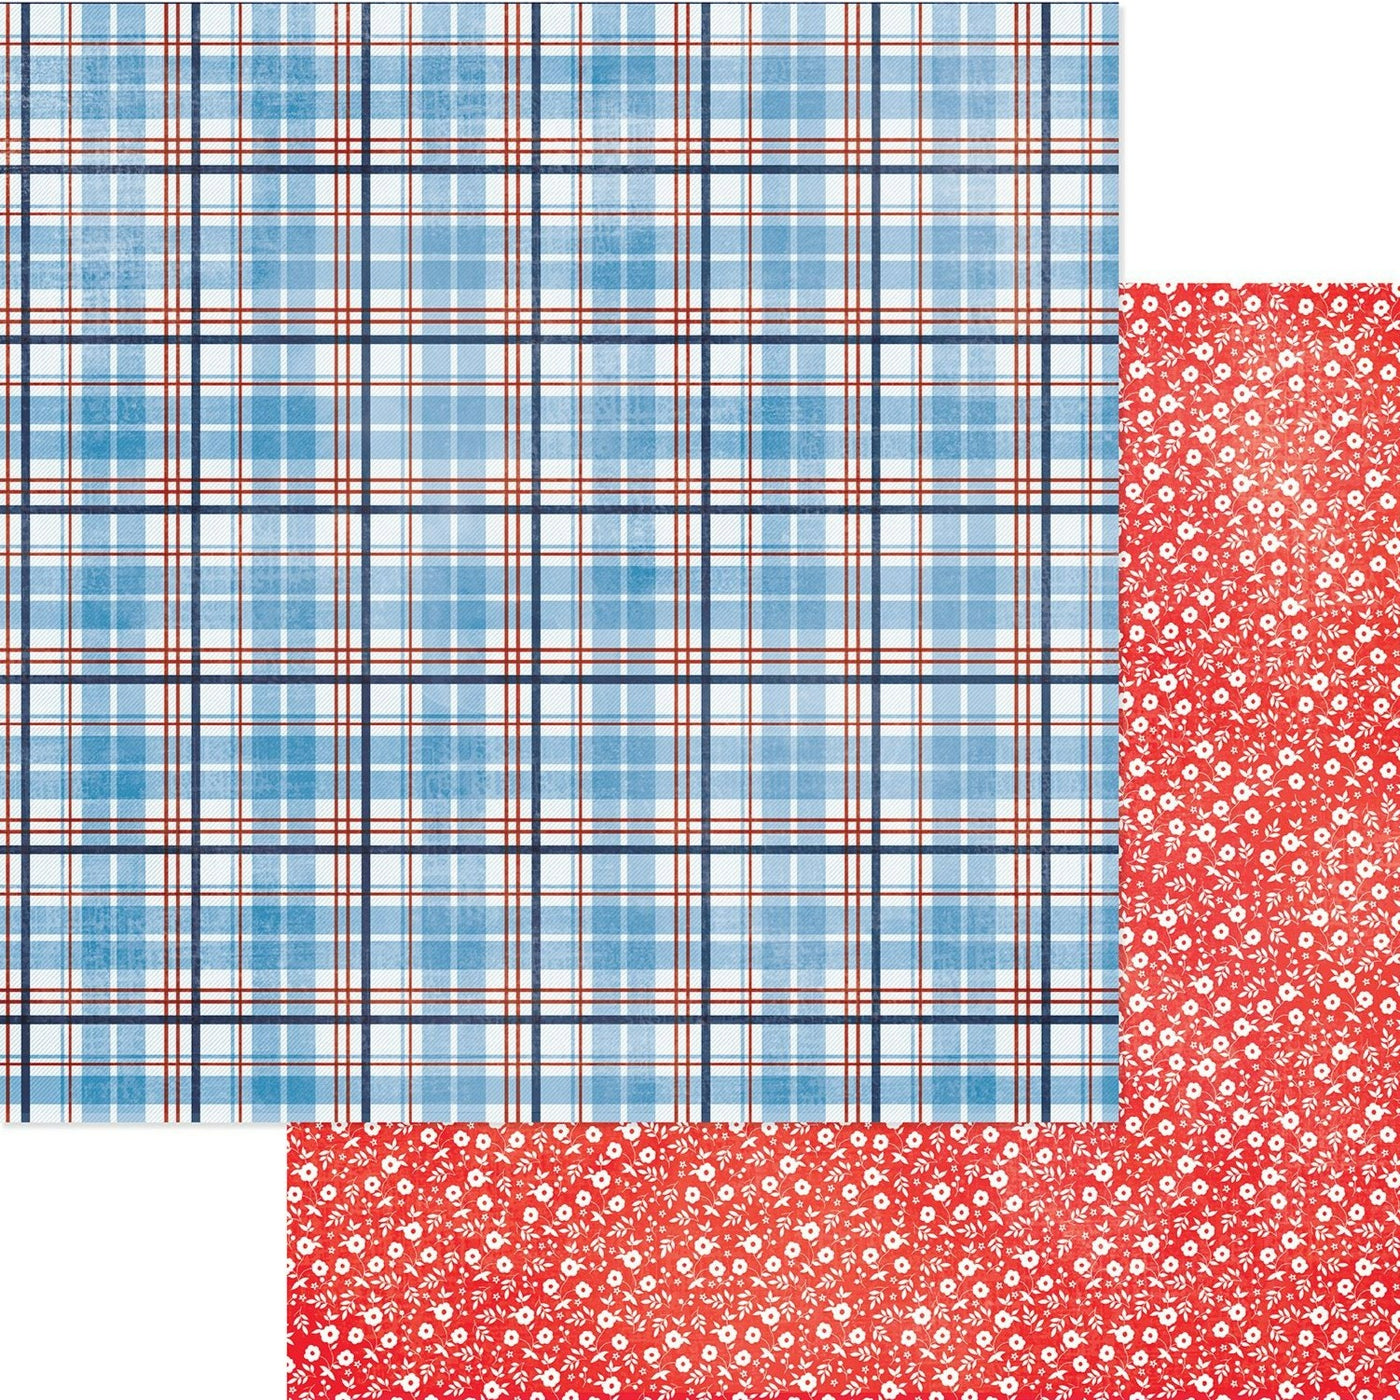 12x12 double-sided patterned paper. (Side A - blue and red plaid on a white background, Side B - small white floral on a red background) - American Crafts